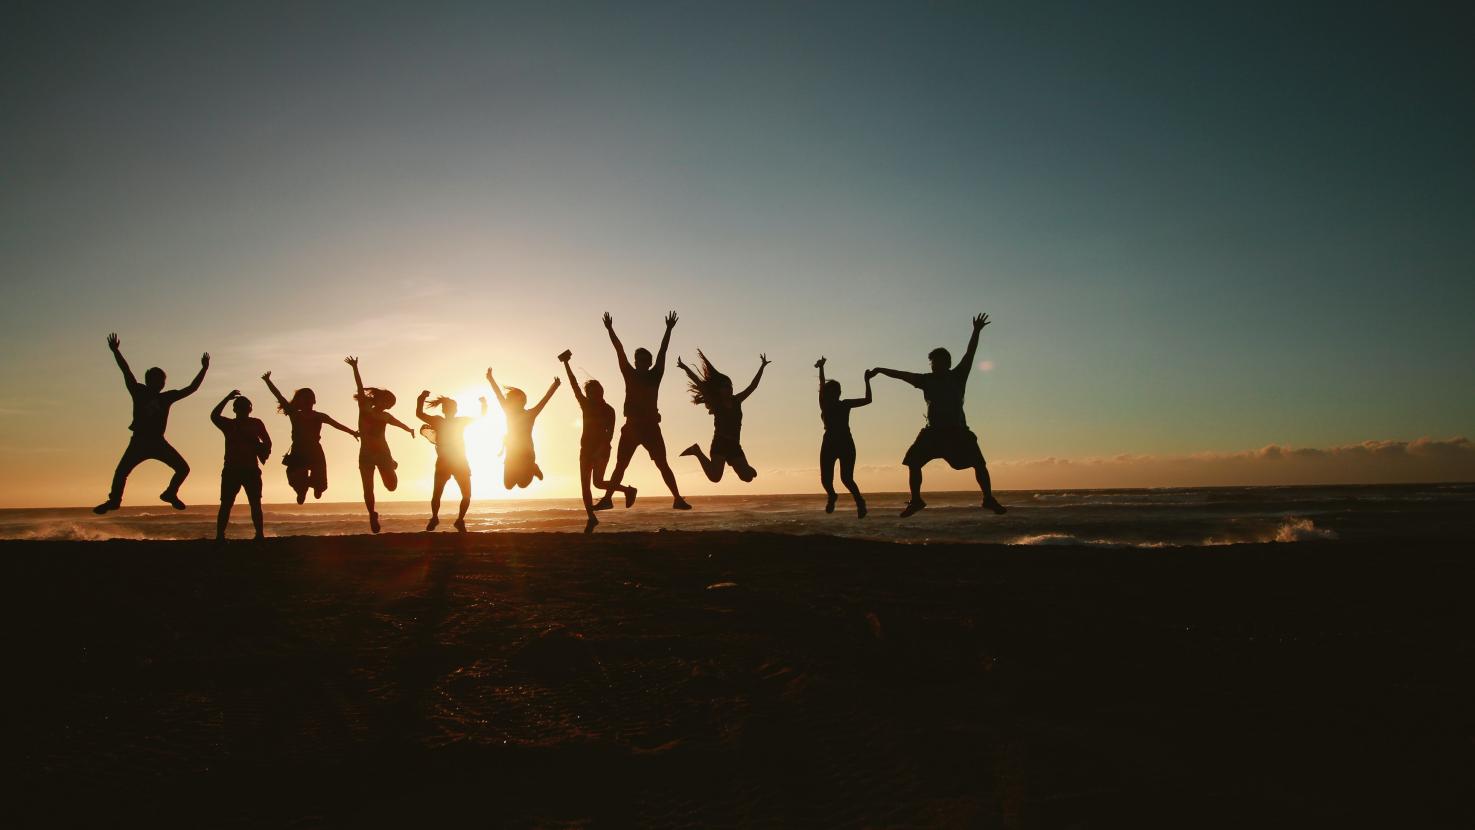 Group of people jumping in the air at sunset